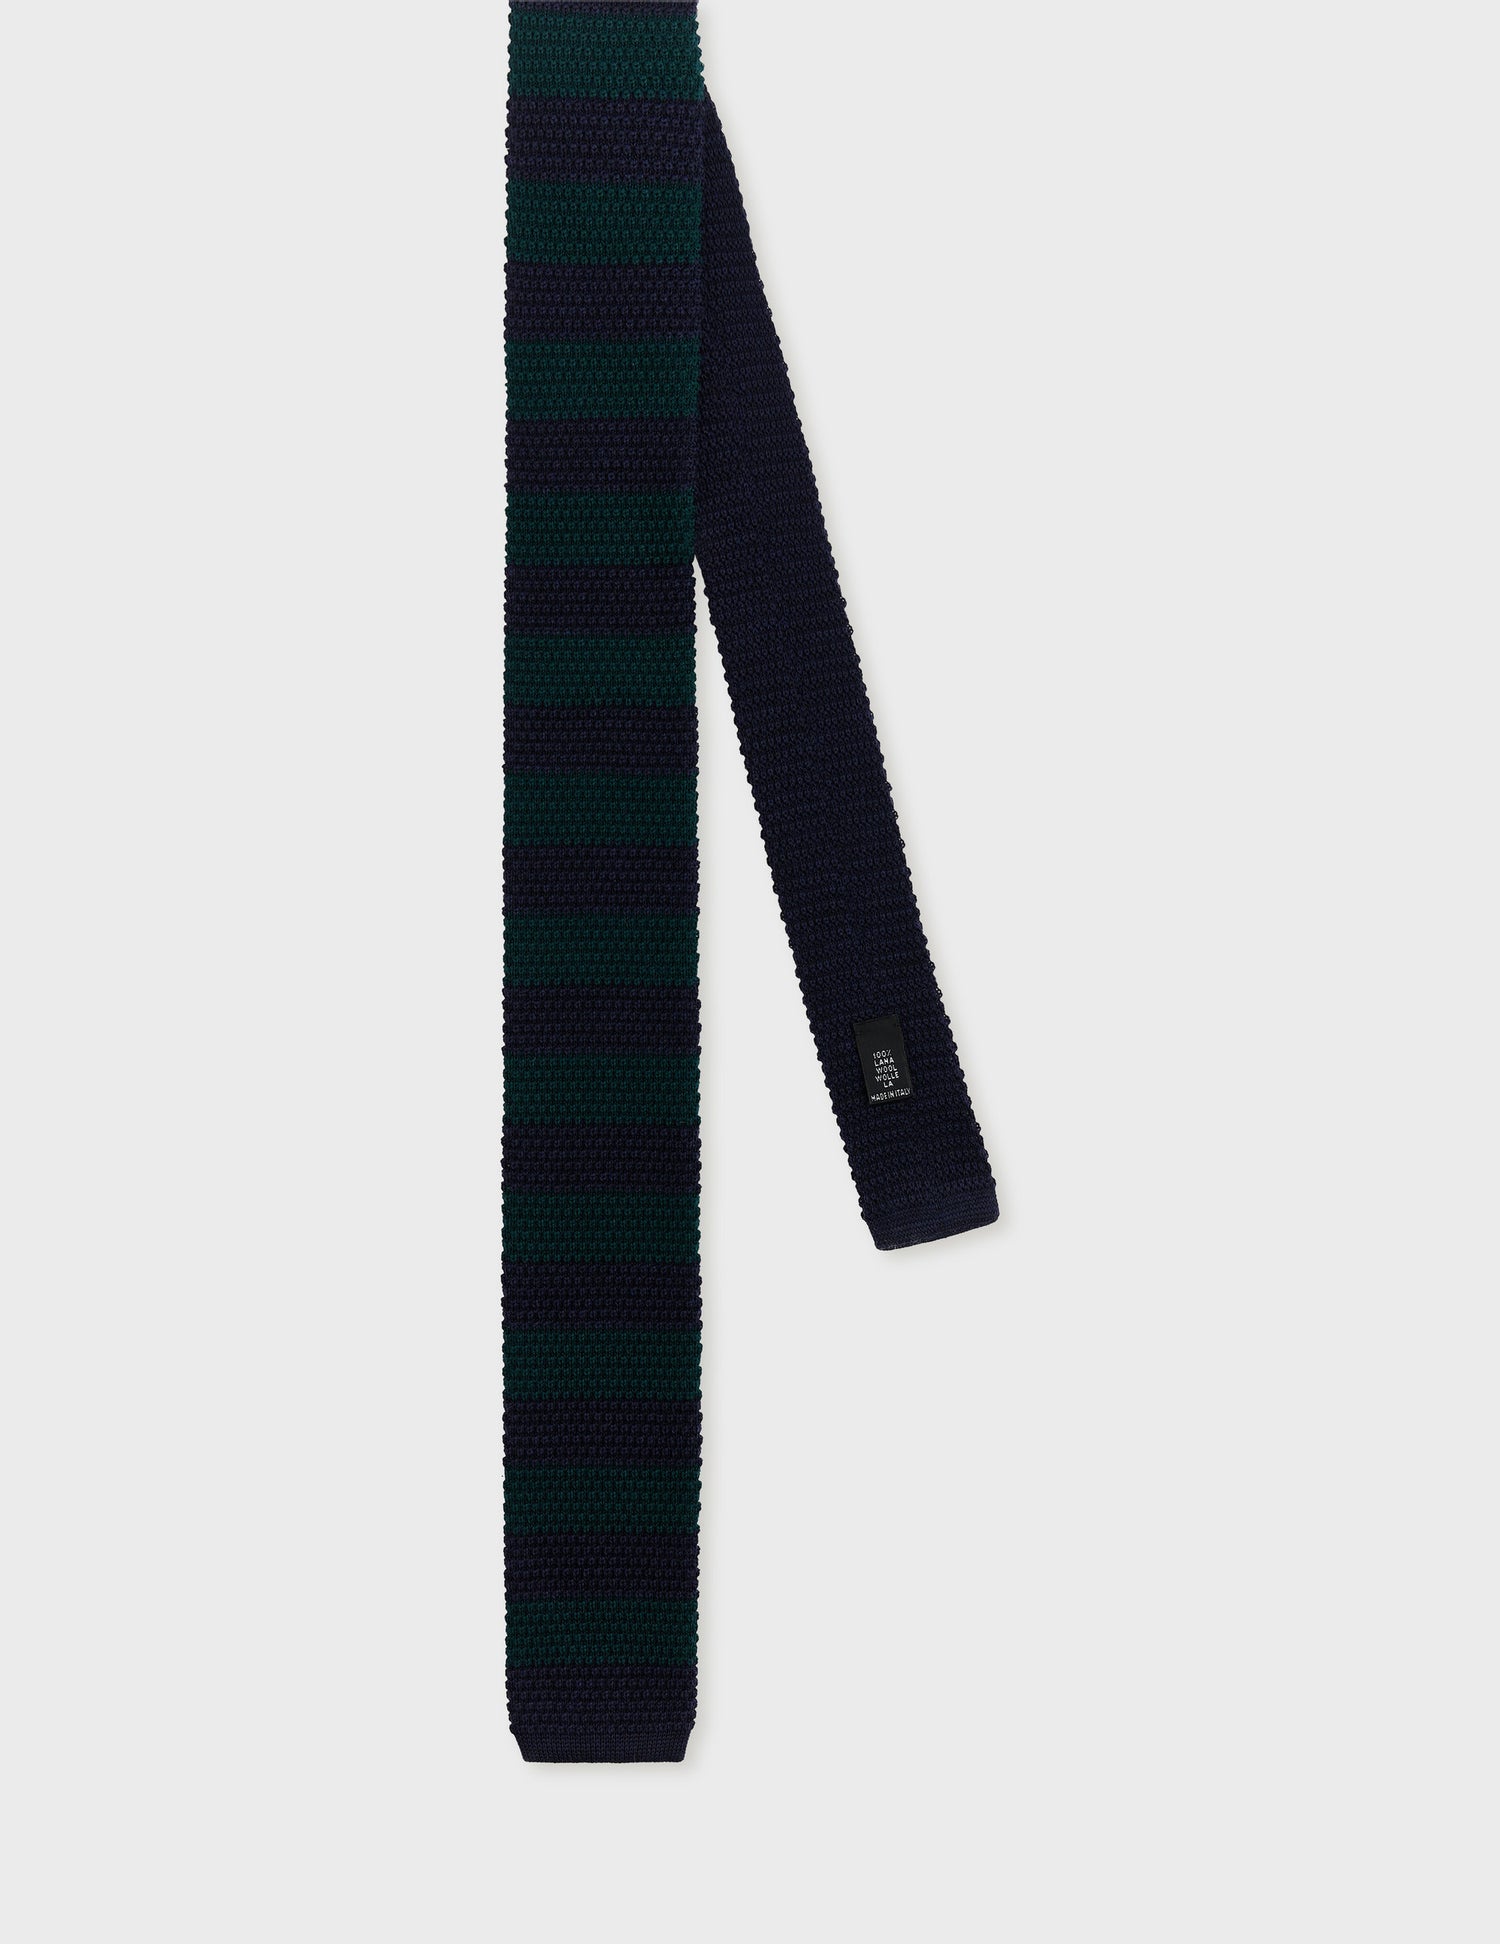 Green and blue wool tie